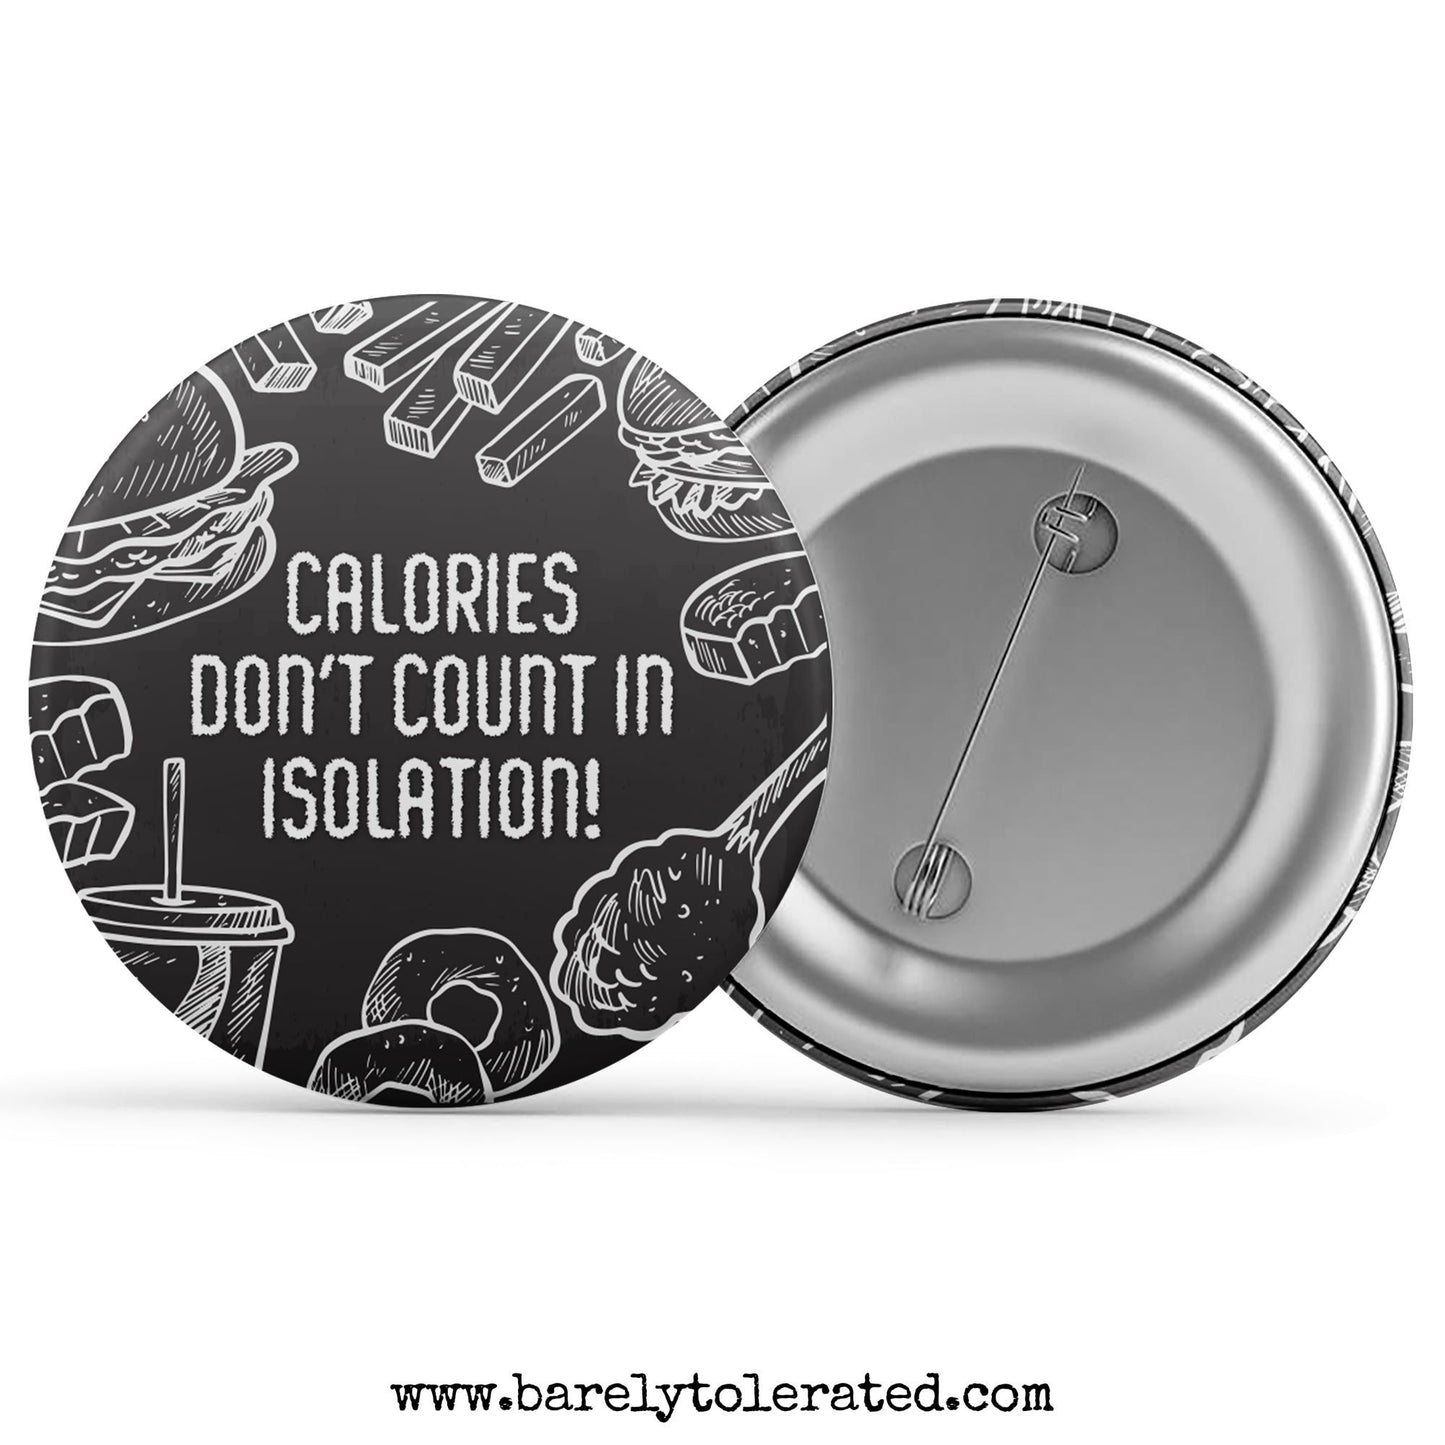 Calories Don't Count In Isolation Image